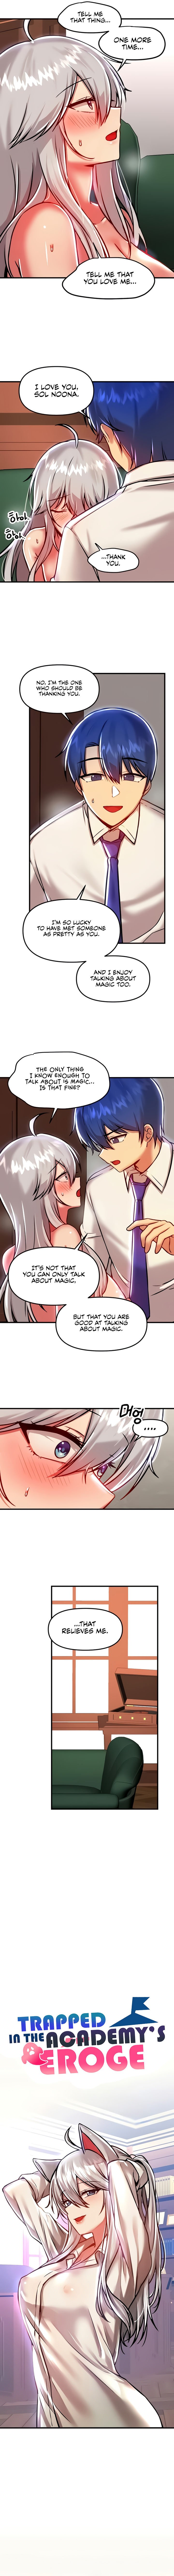 trapped-in-the-academys-eroge-chap-89-5